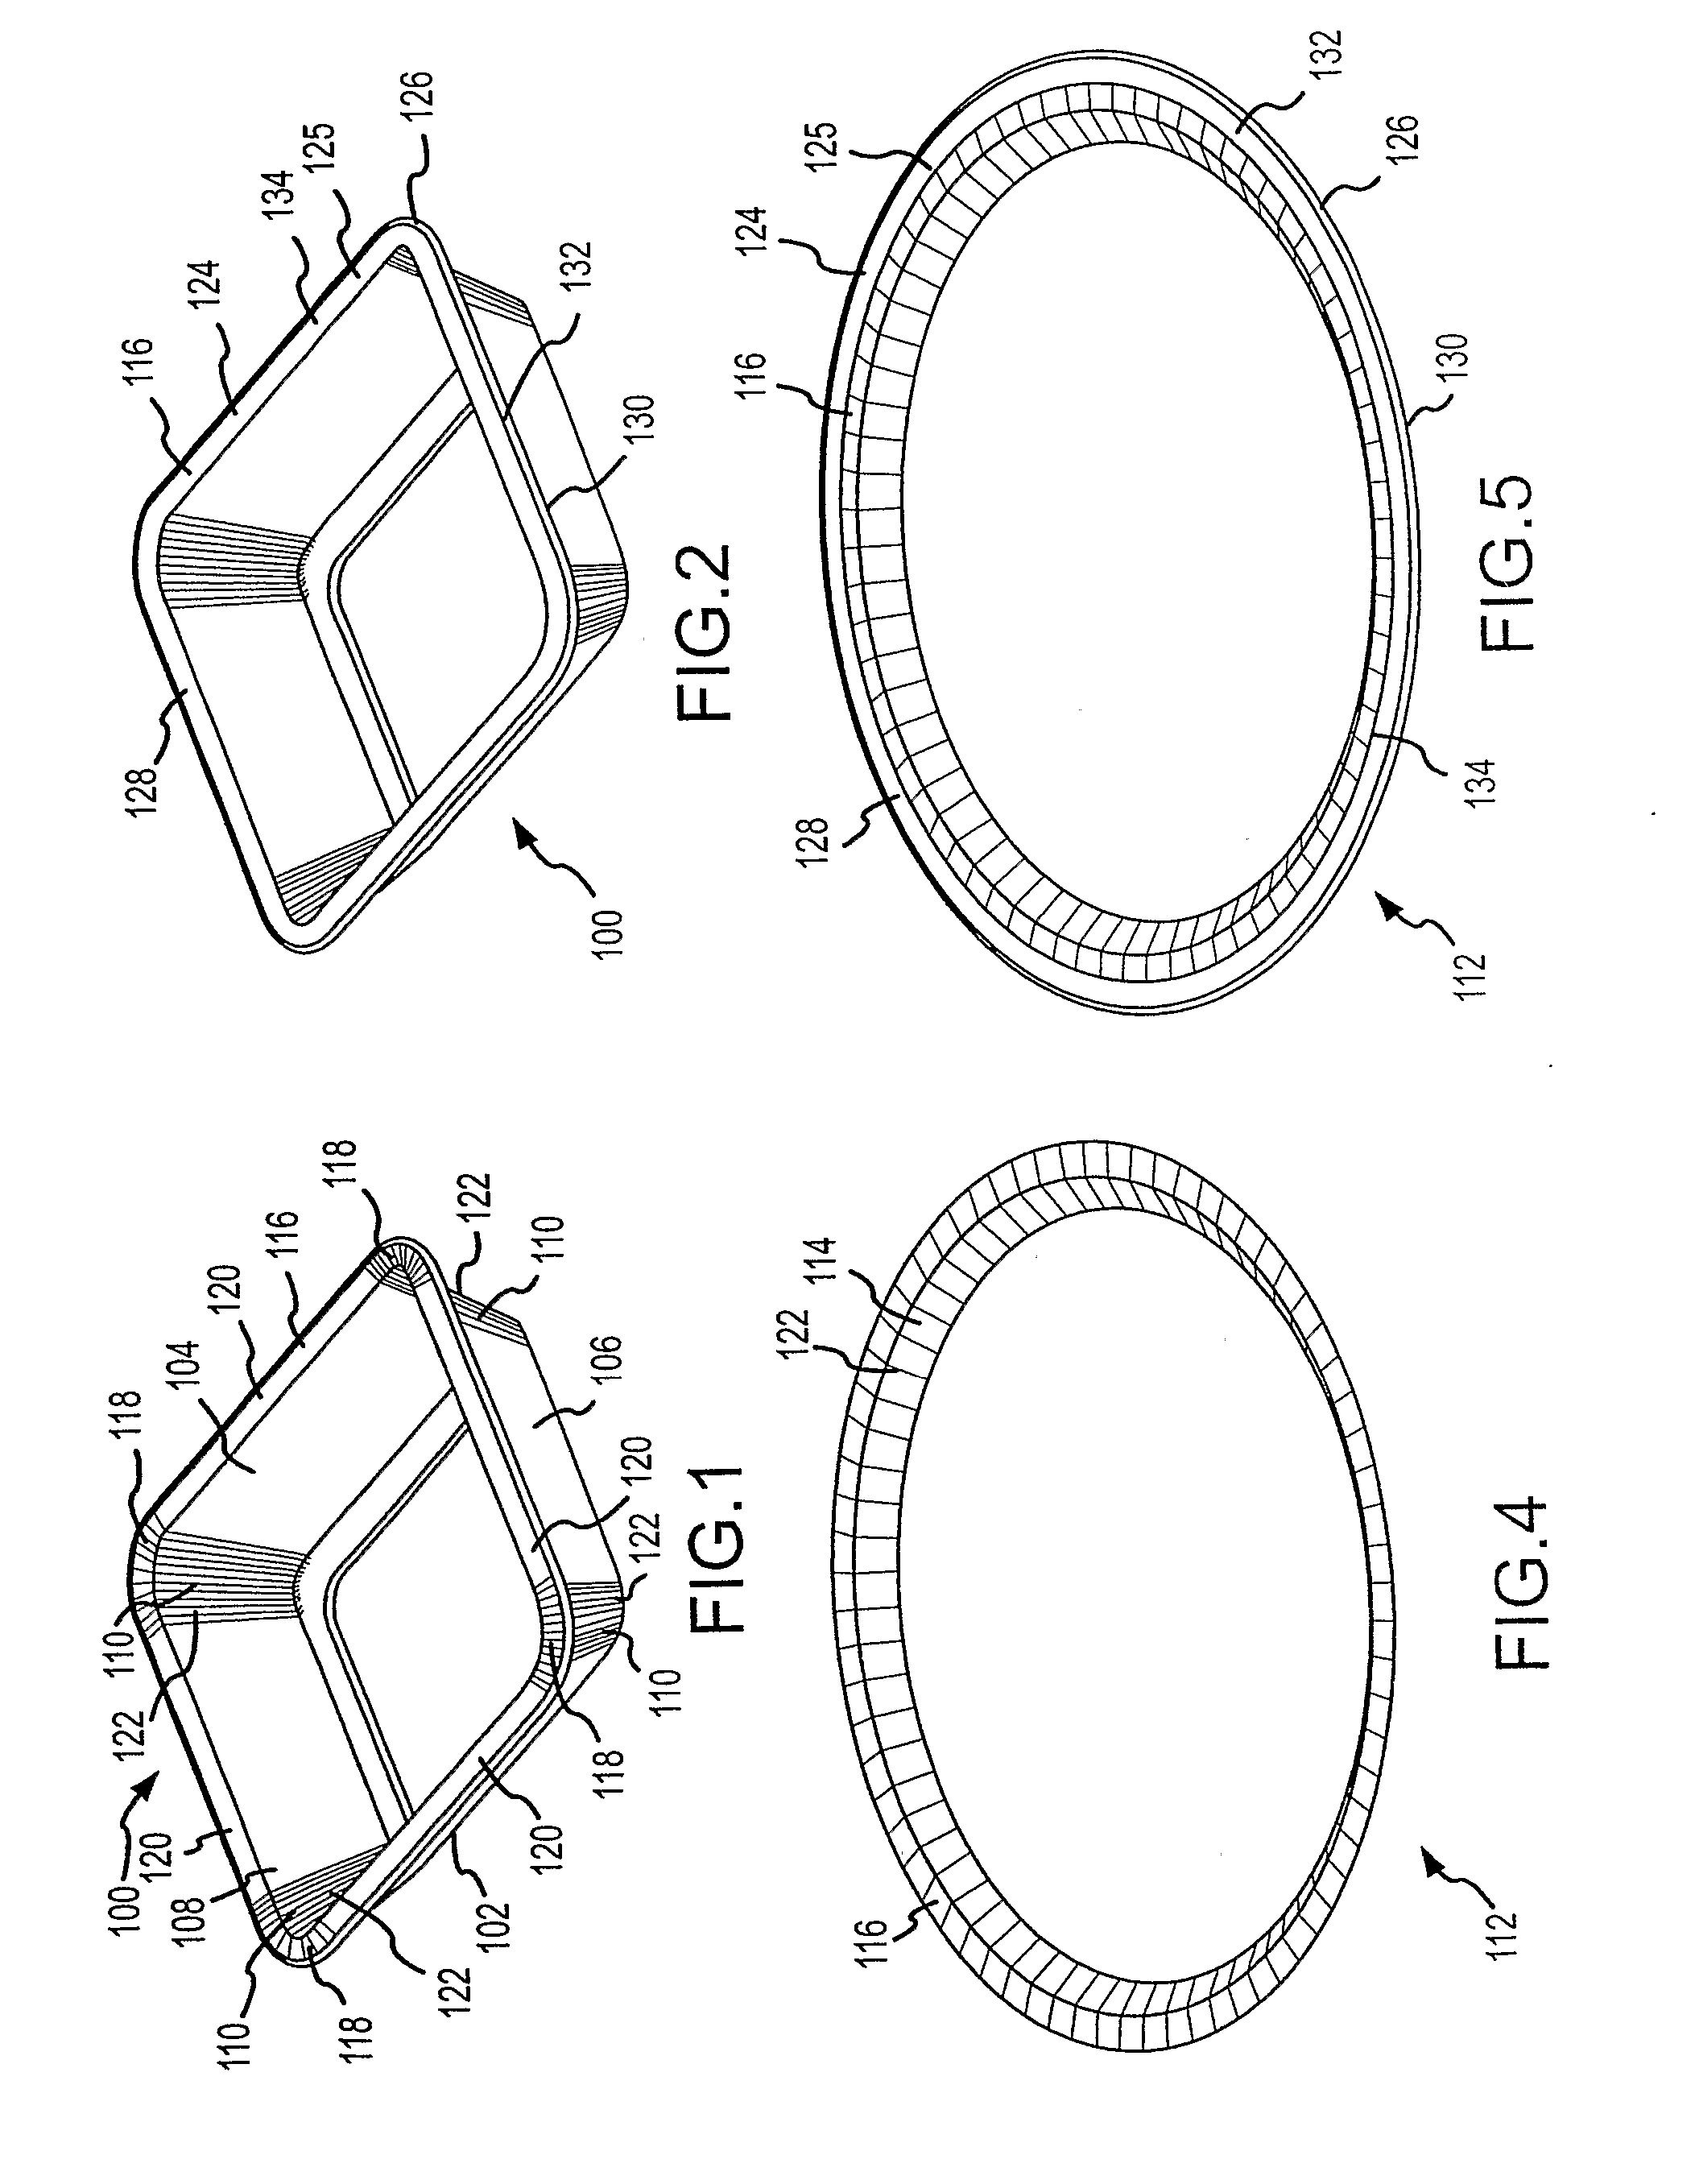 Container Having a Rim or other Feature Encapsulated by or Formed From Injection-Molded Material